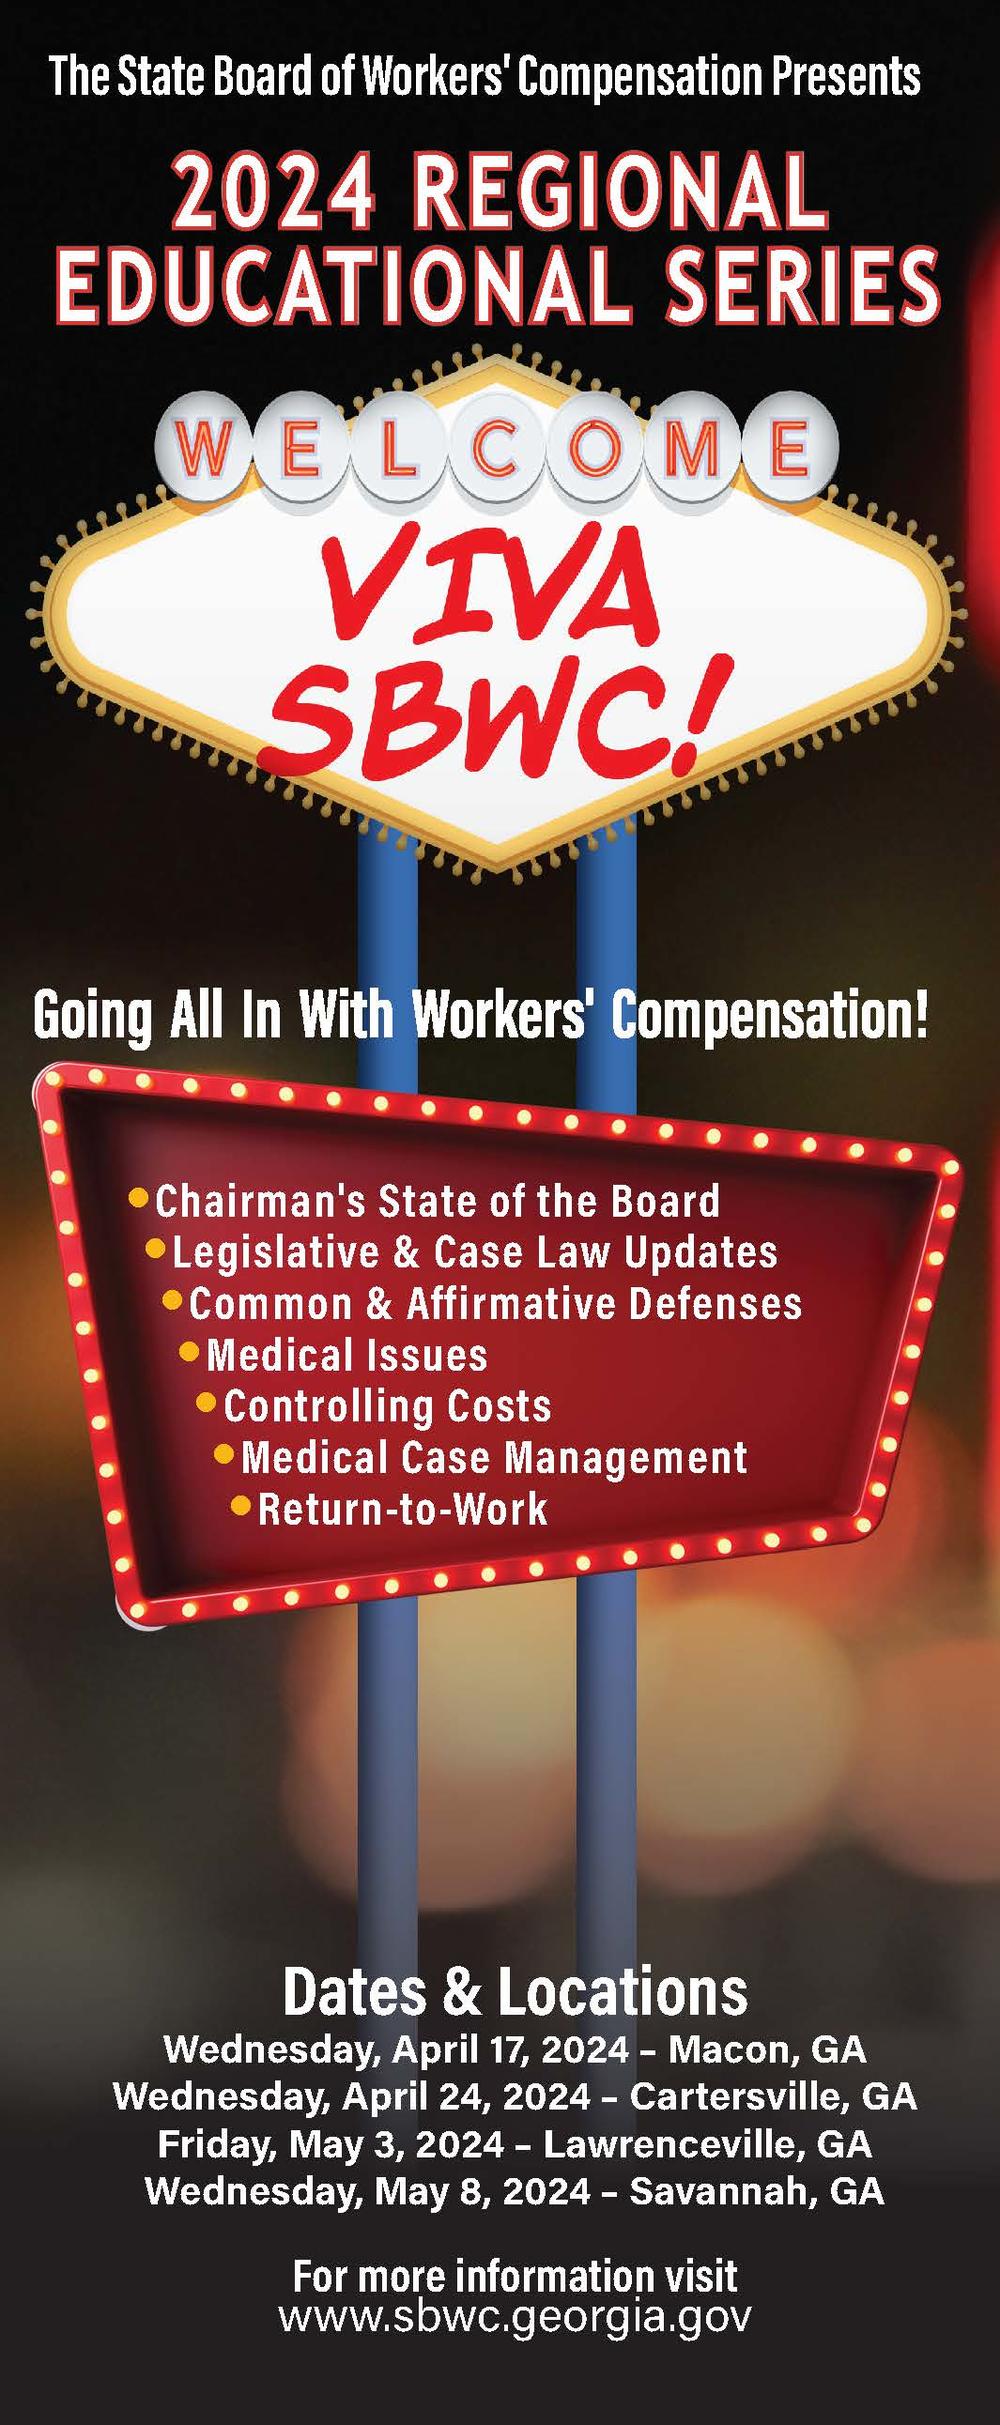 Welcome Viva SBWC! - Going All in with Workers' Compensation